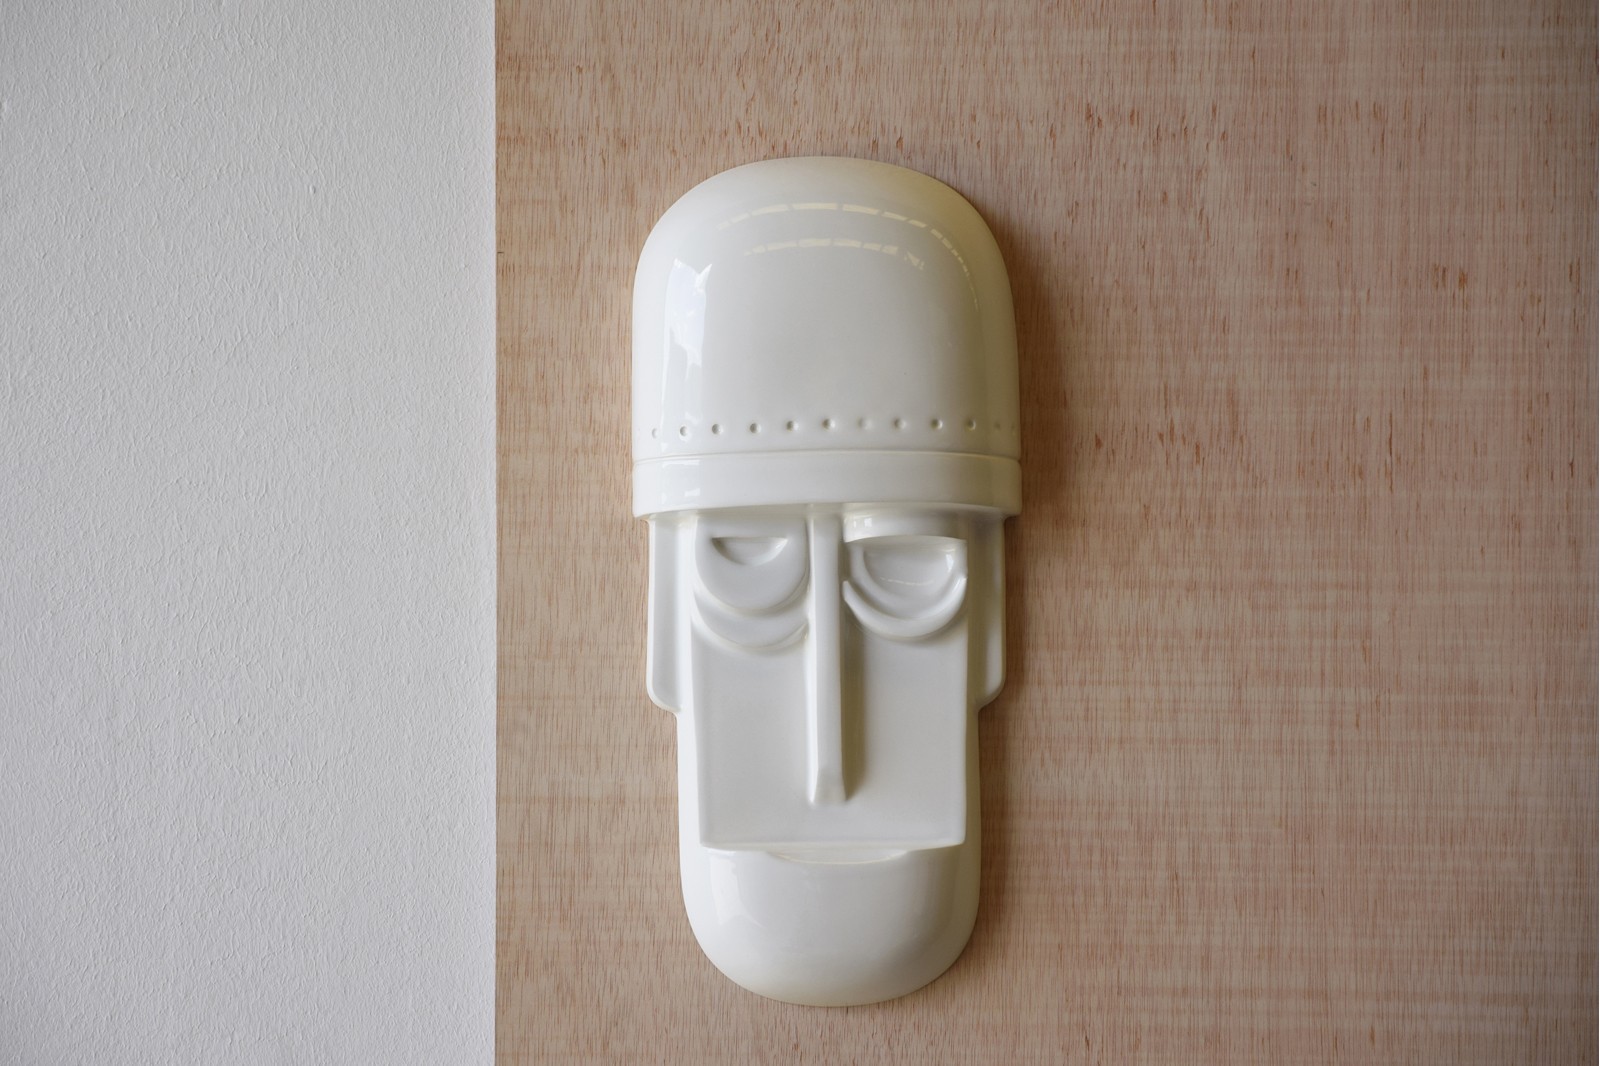 MASKS COLLECTION CERAMIC GLOSSY WHITE. WALL